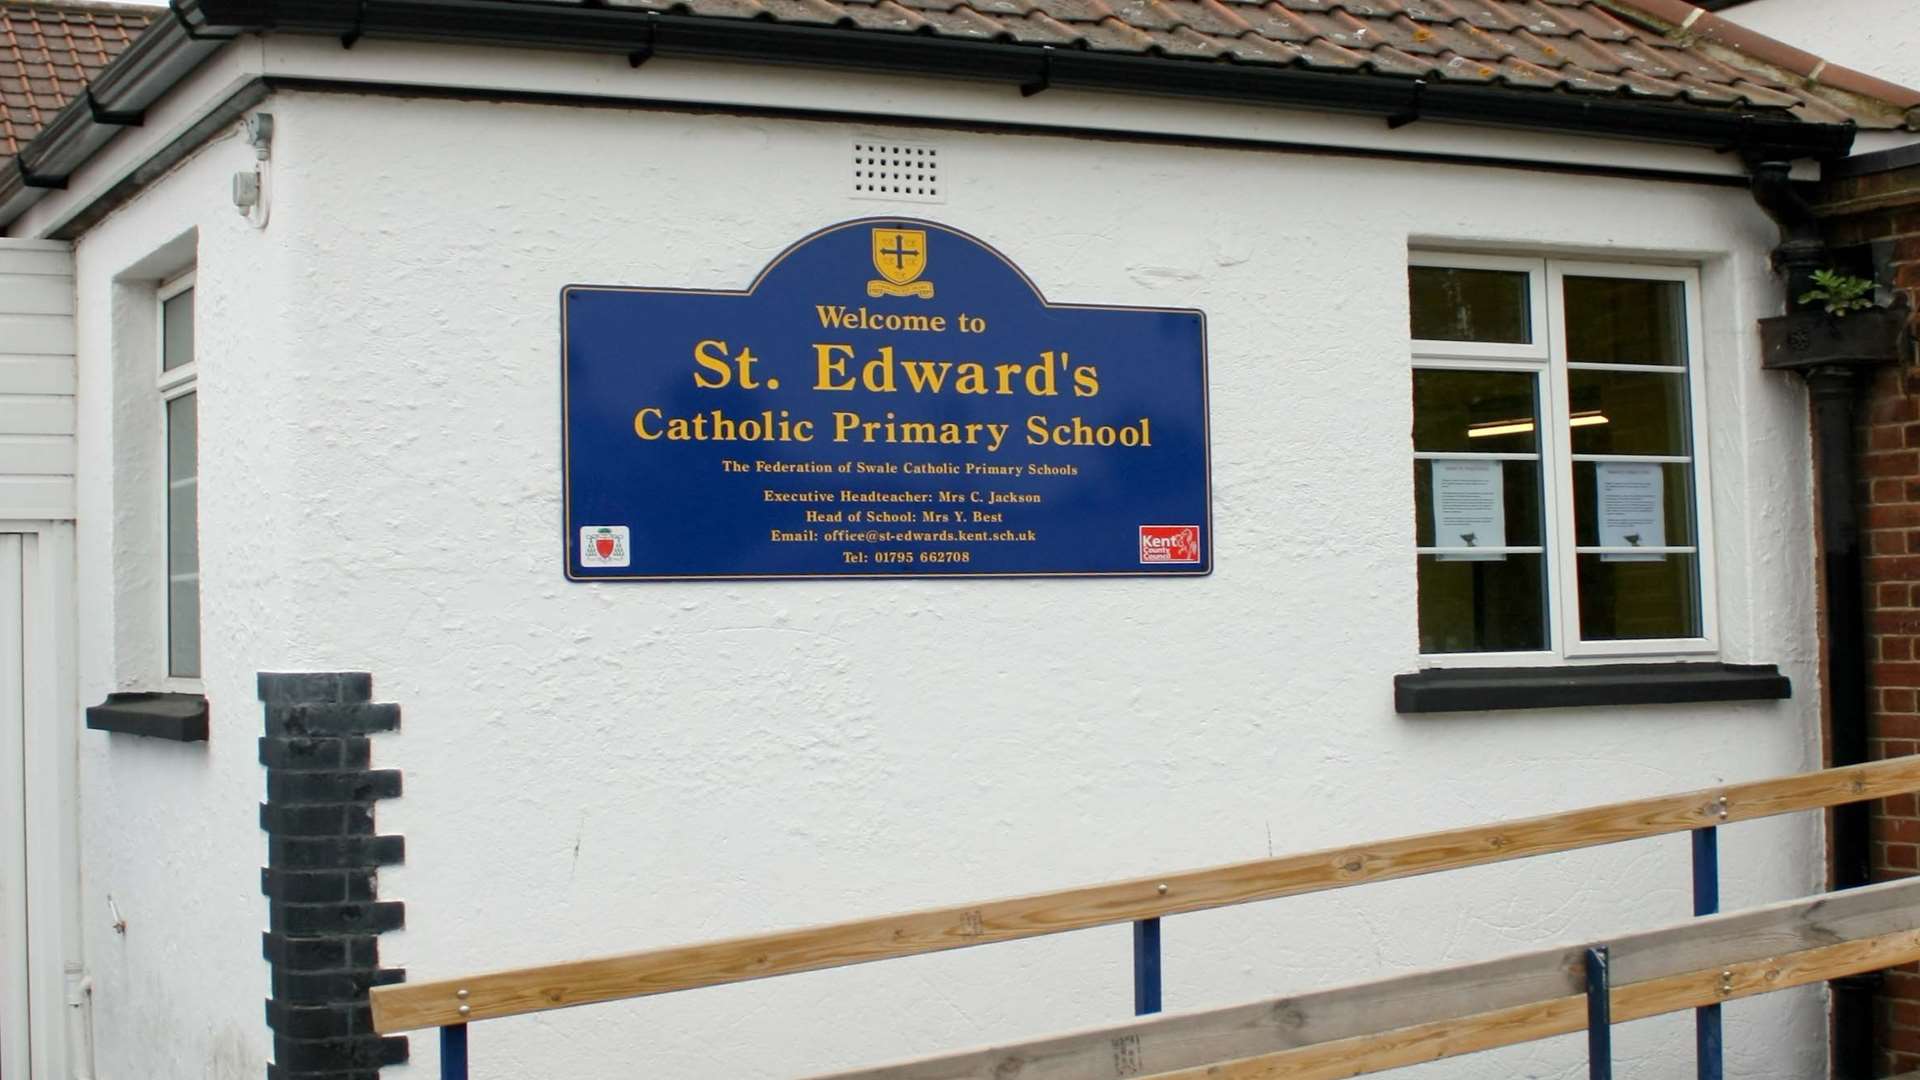 St Edward's Catholic Primary School in Sheerness.